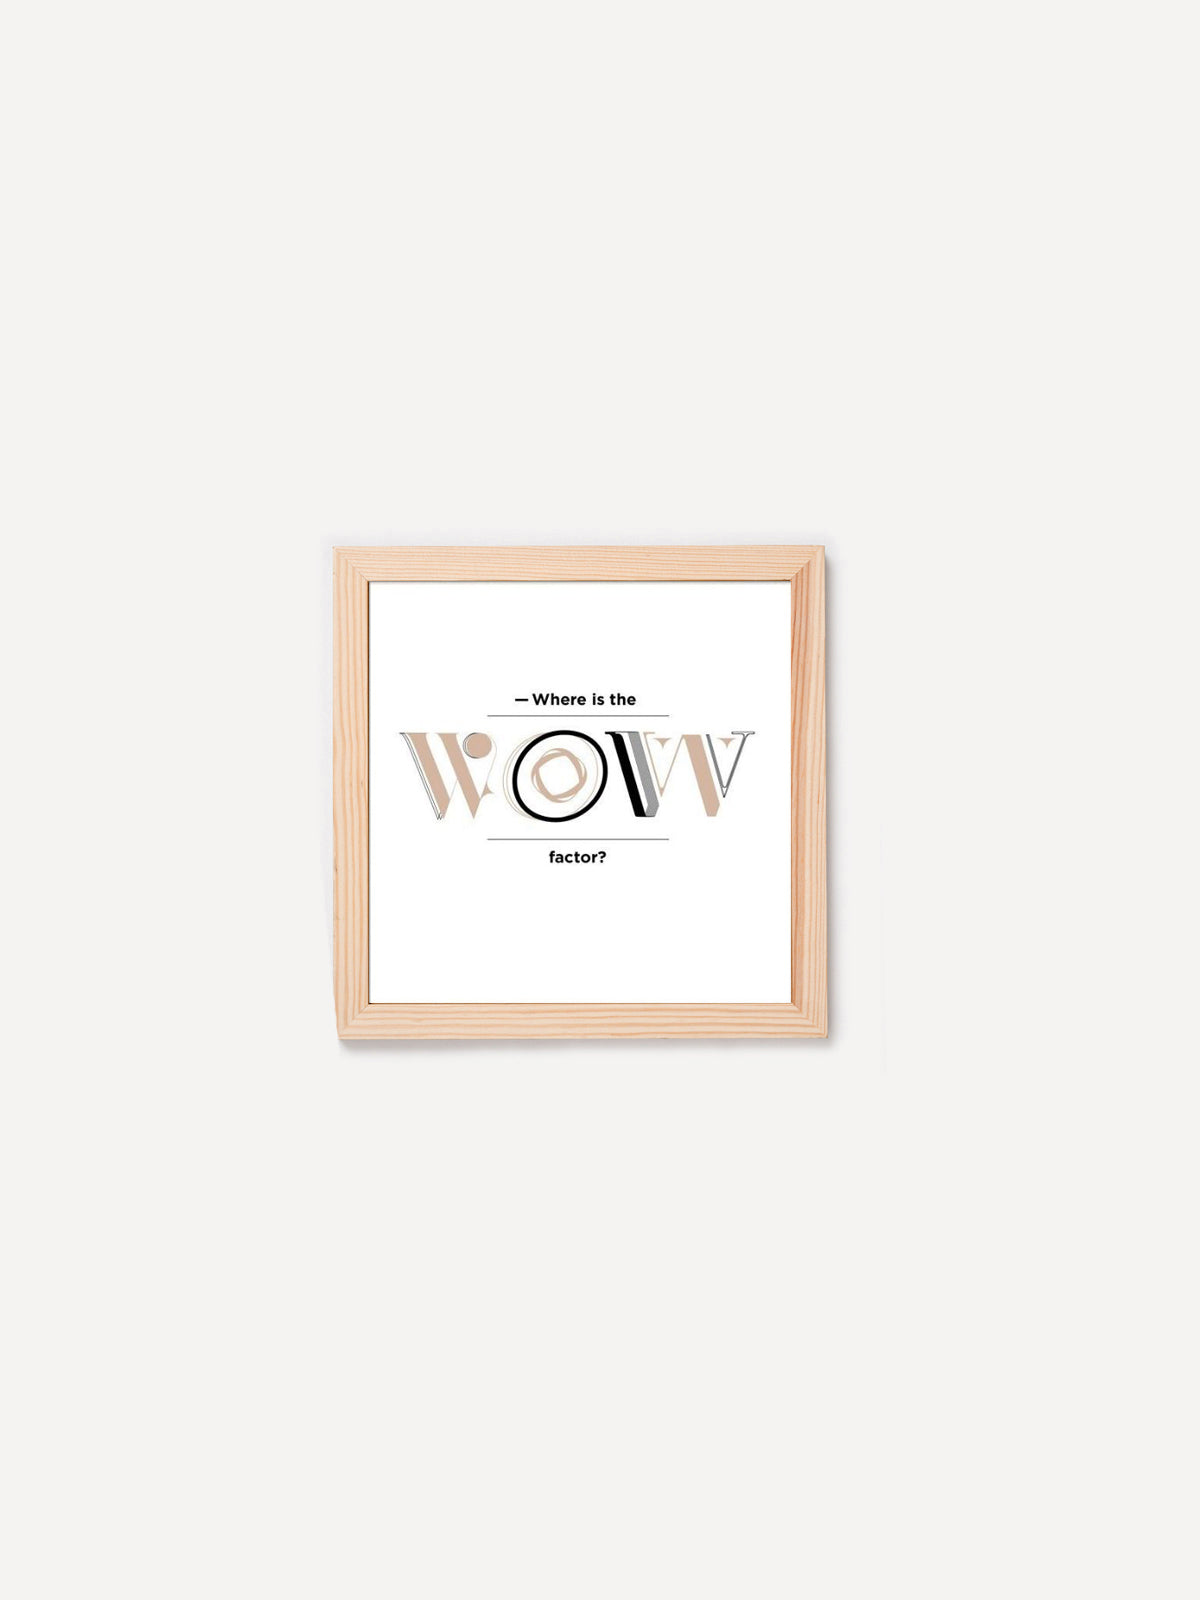 WHERE IS THE WOW FACTOR grafika – Puskás Marcell